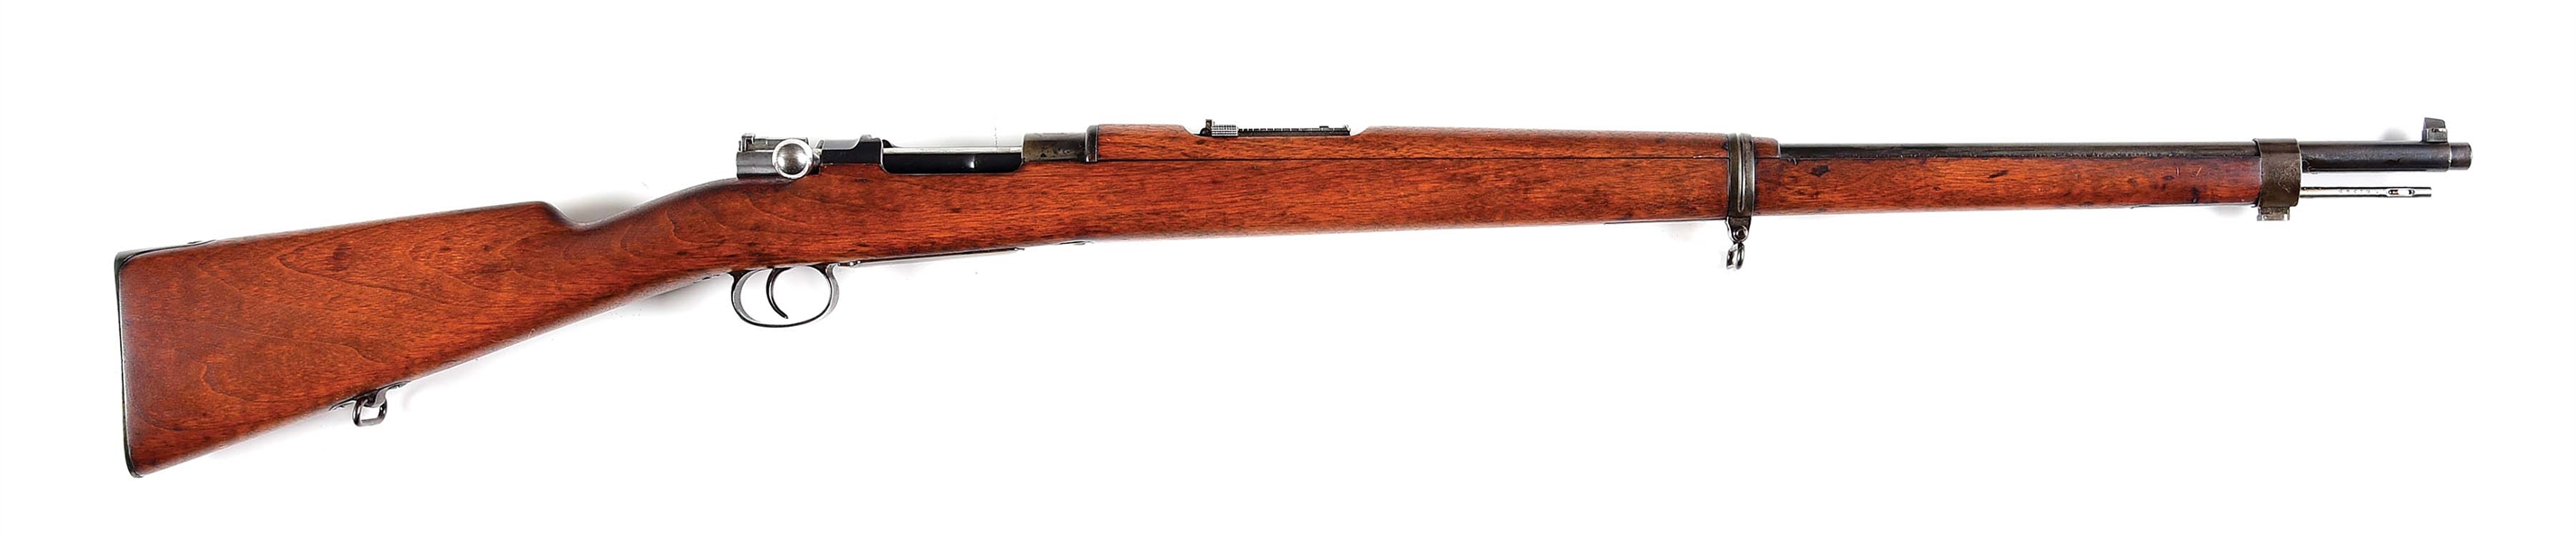 (A) SPANISH CONTRACT MODEL 1893 MAUSER BOLT ACTION RIFLE MANUFACTURED BY LOEWE.